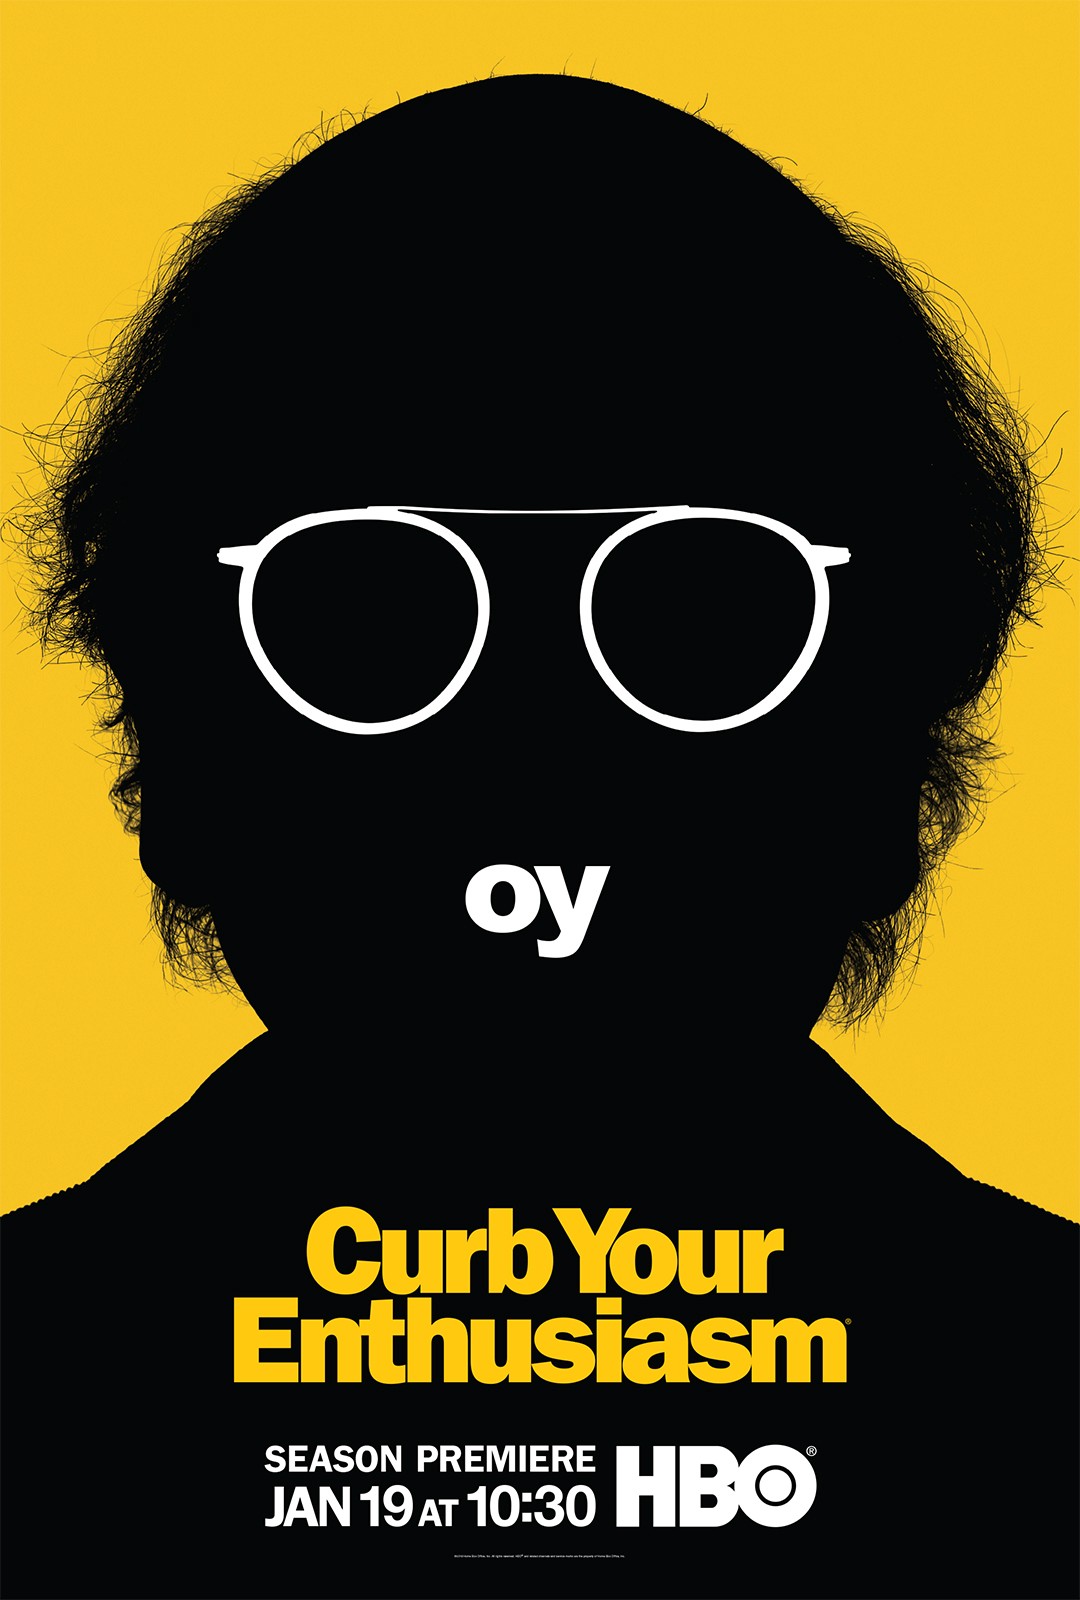 Curb Your Enthusiasm Season 10 Premiere Date, Poster and Trailer